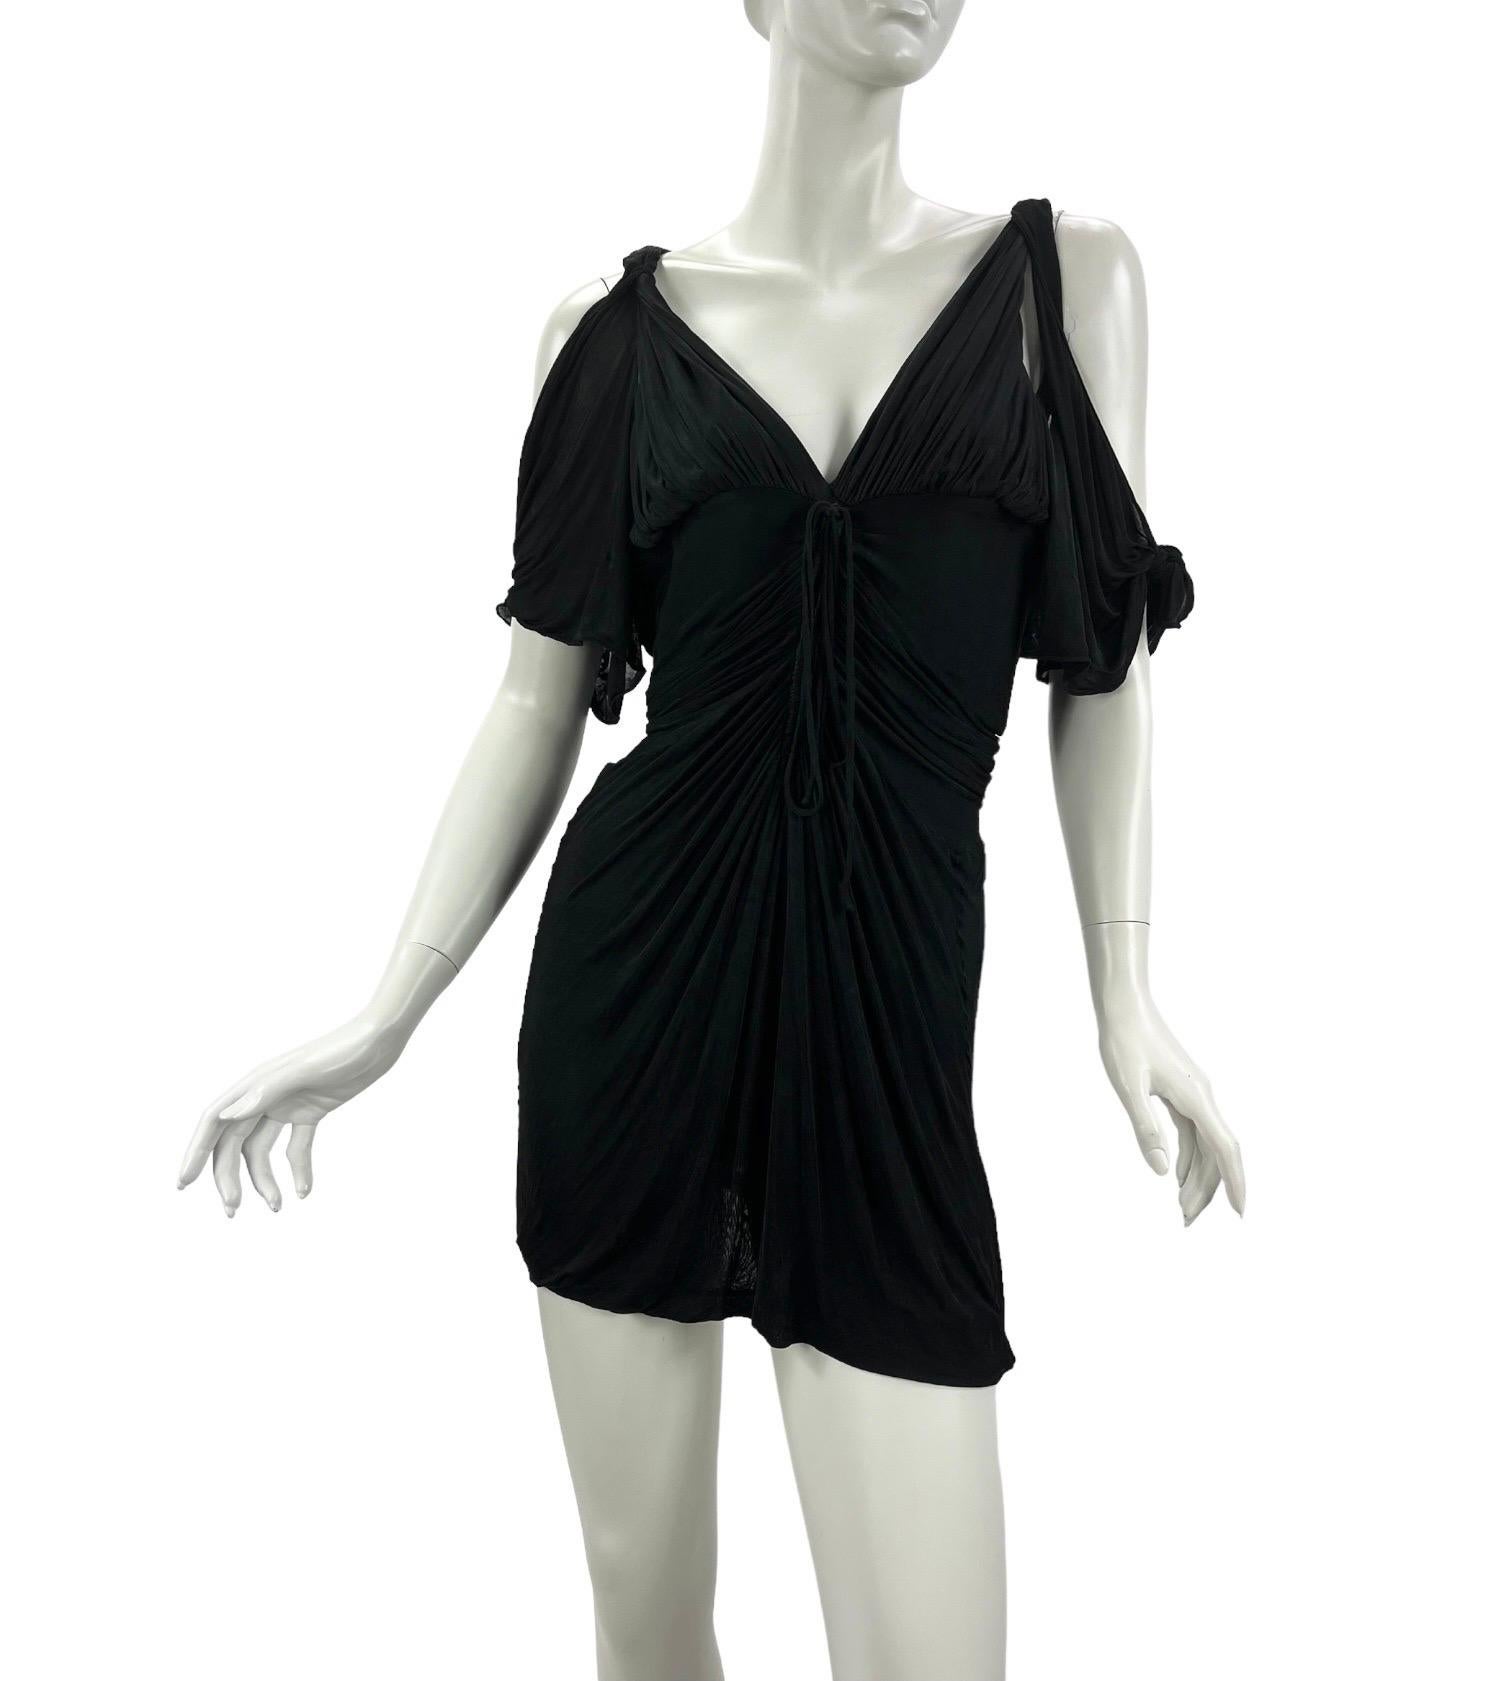 Rare GUCCI Black Mini Kimono Dress.   
S/S 2003 Gucci collection designed by Tom Ford.   
Unique, Rare and Highly Collectible! Beautifully crafted and guaranteed to turn heads.   
IT Size 40 - US 4 
Very stretchy. Self lined. Excellent, pre-owned